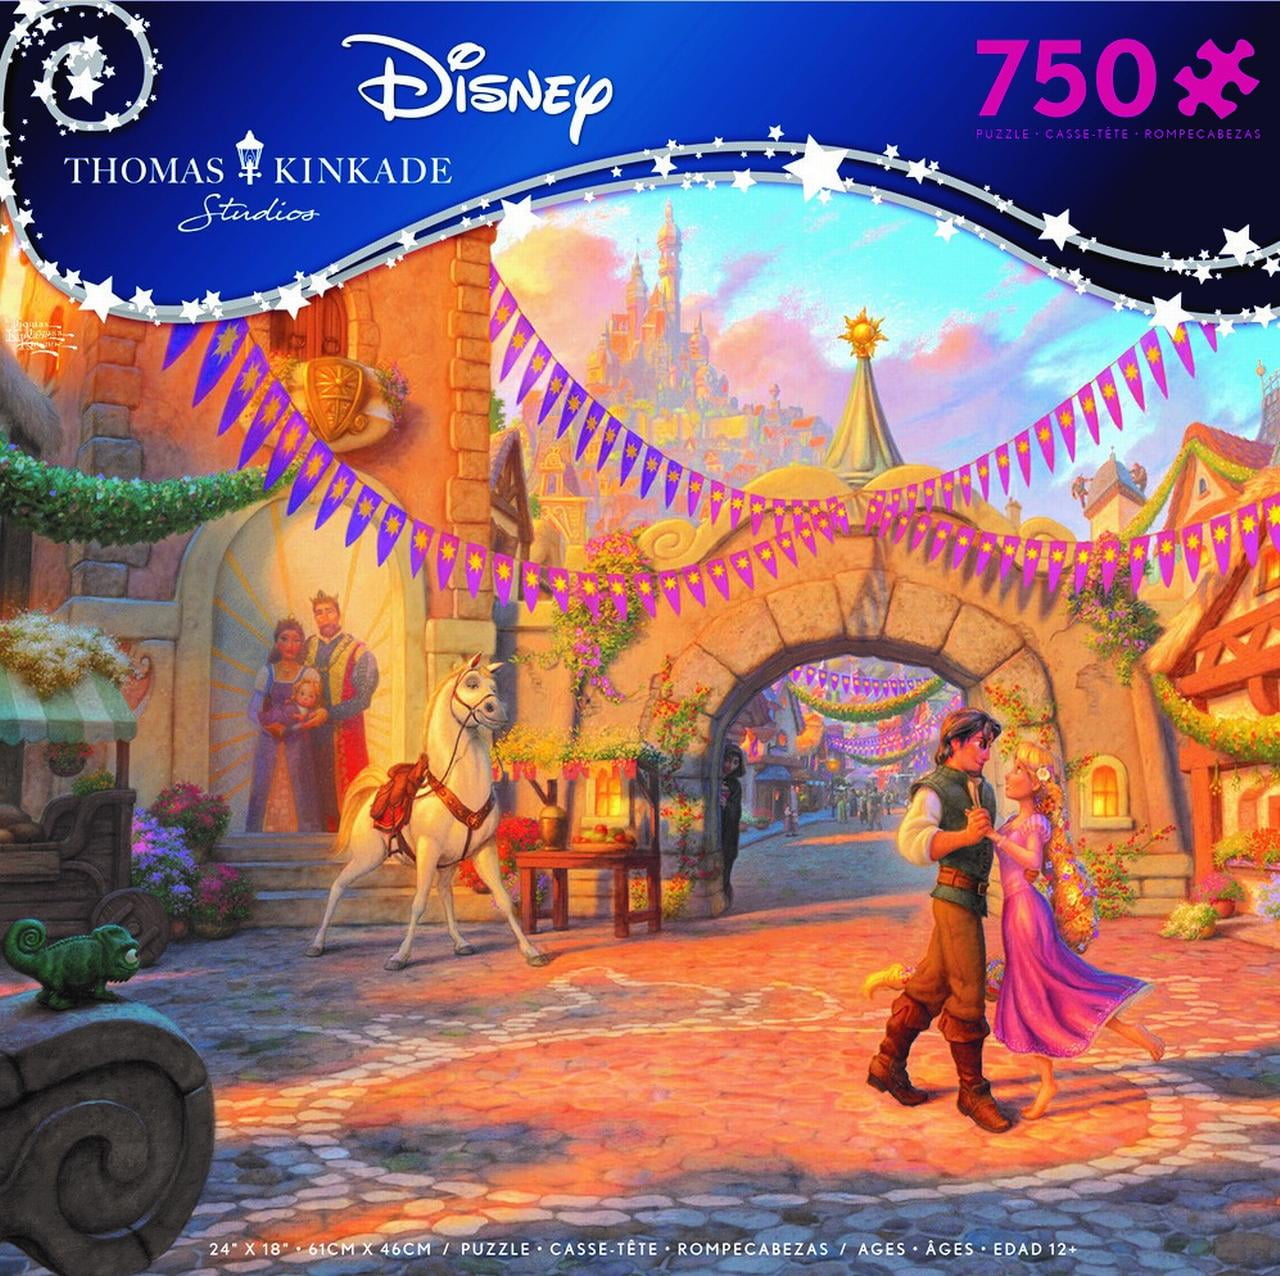 290329 for sale online Ceaco Thomas Kinkade The Disney Collection Tangled 750 Piece Jigsaw Puzzle 